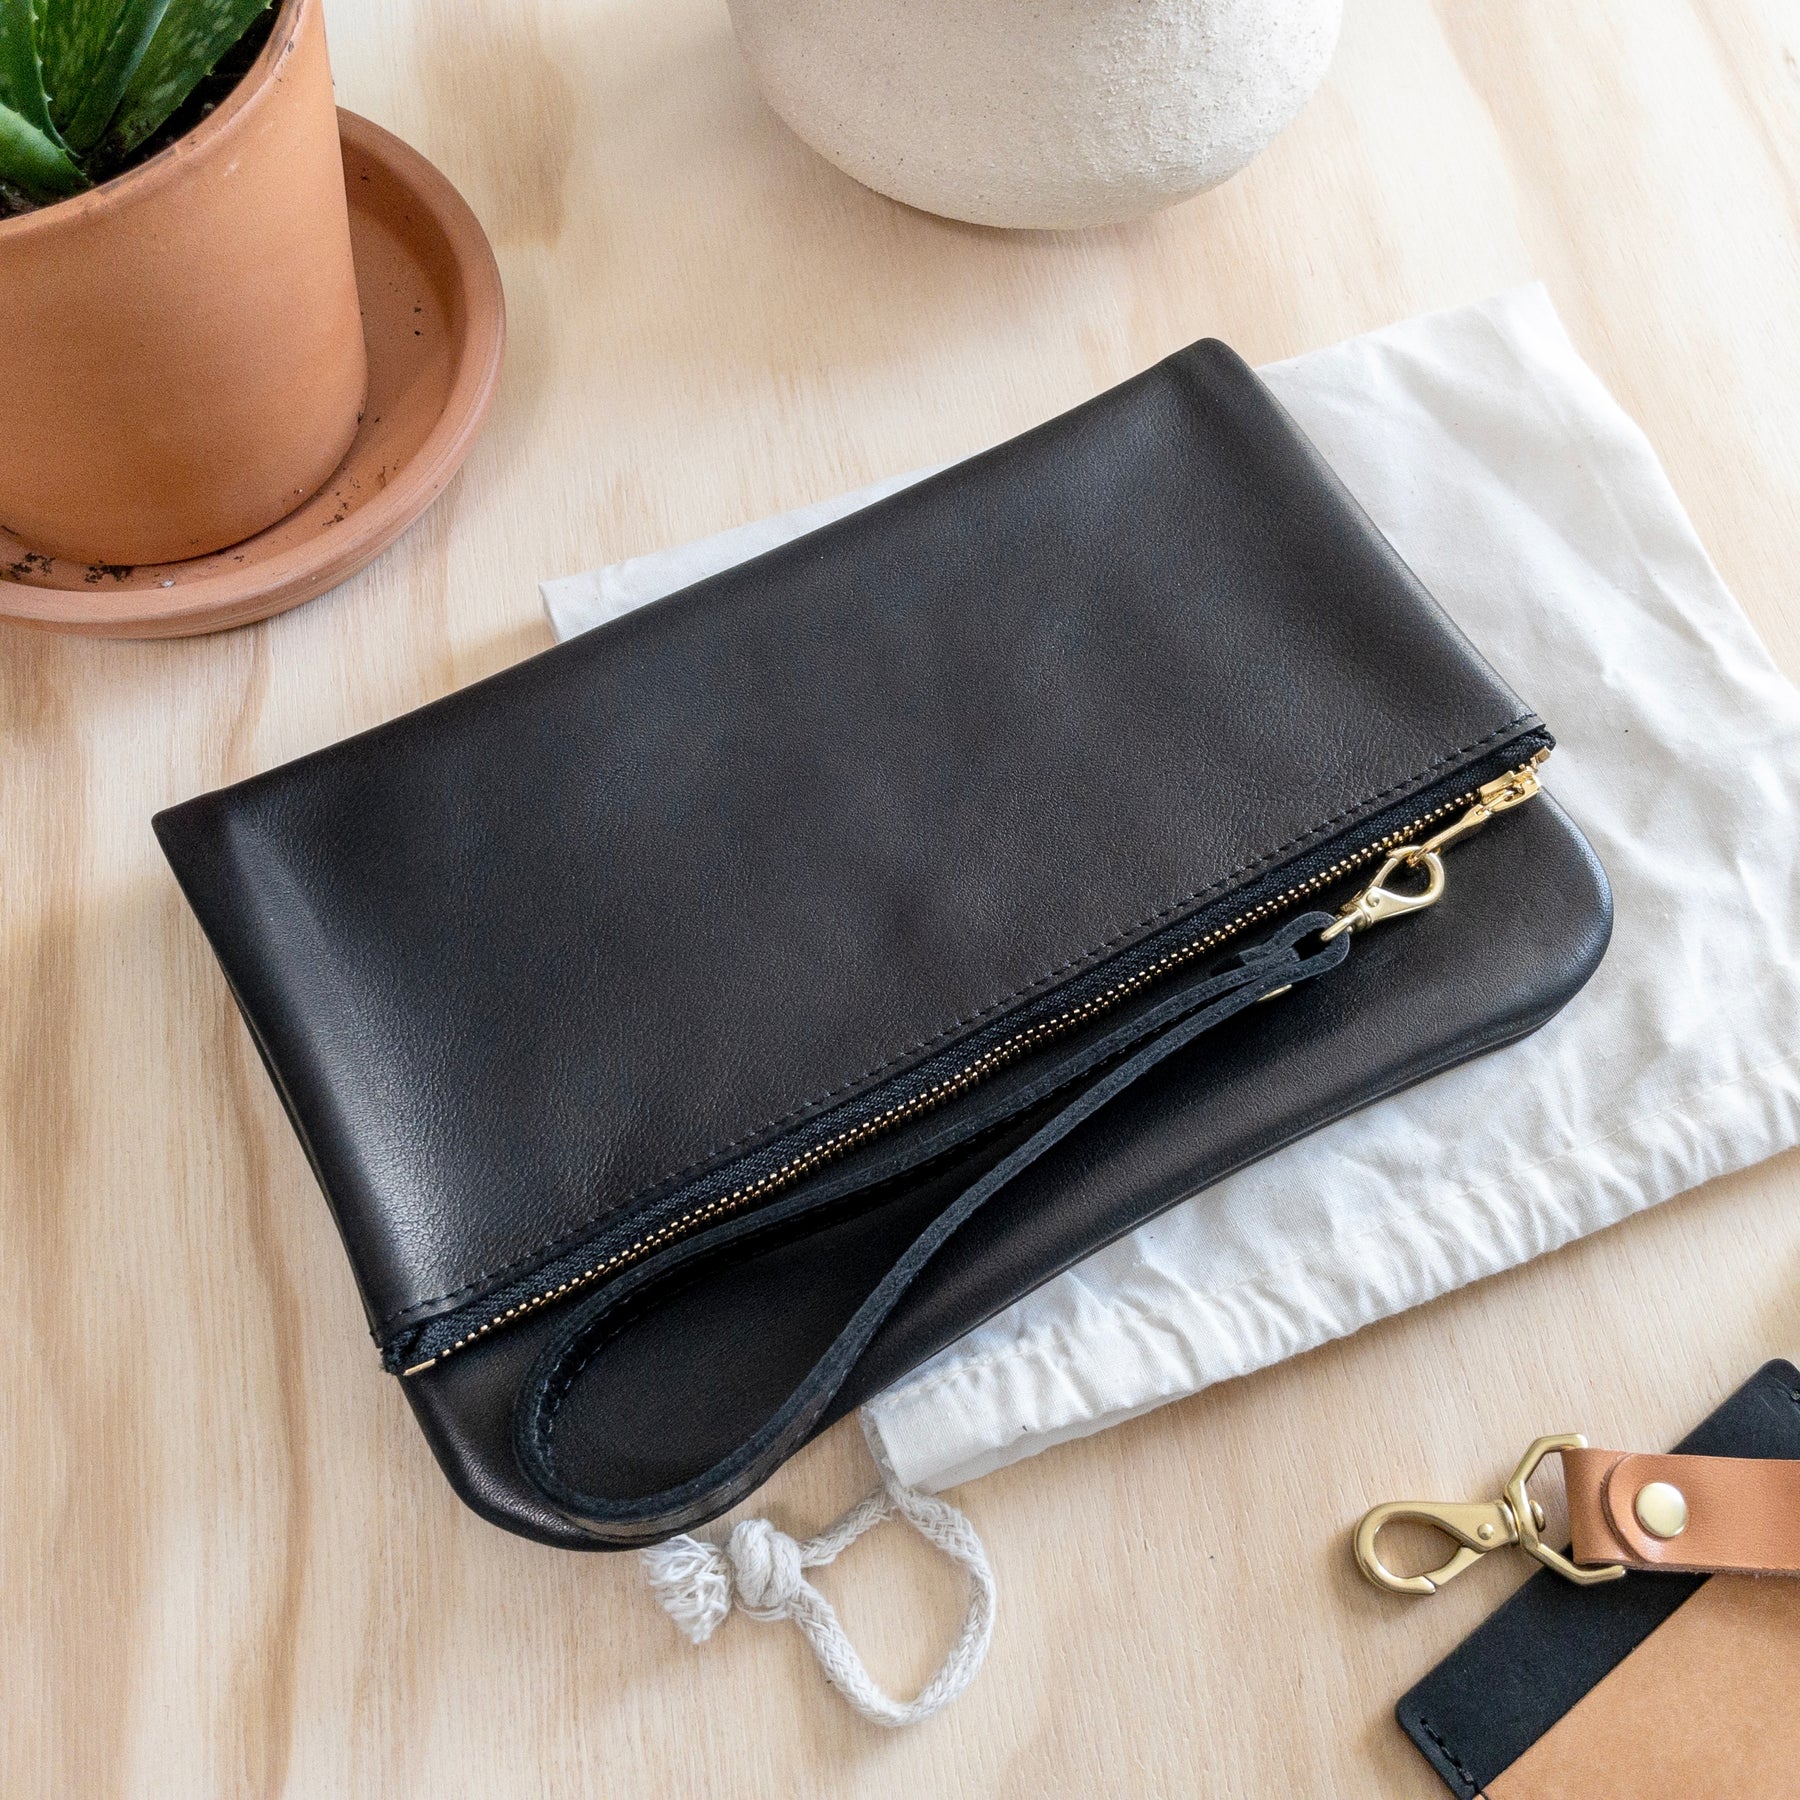 Hides in Hand Bag - Fold Over Purse - Black – Authentique Gift Shop